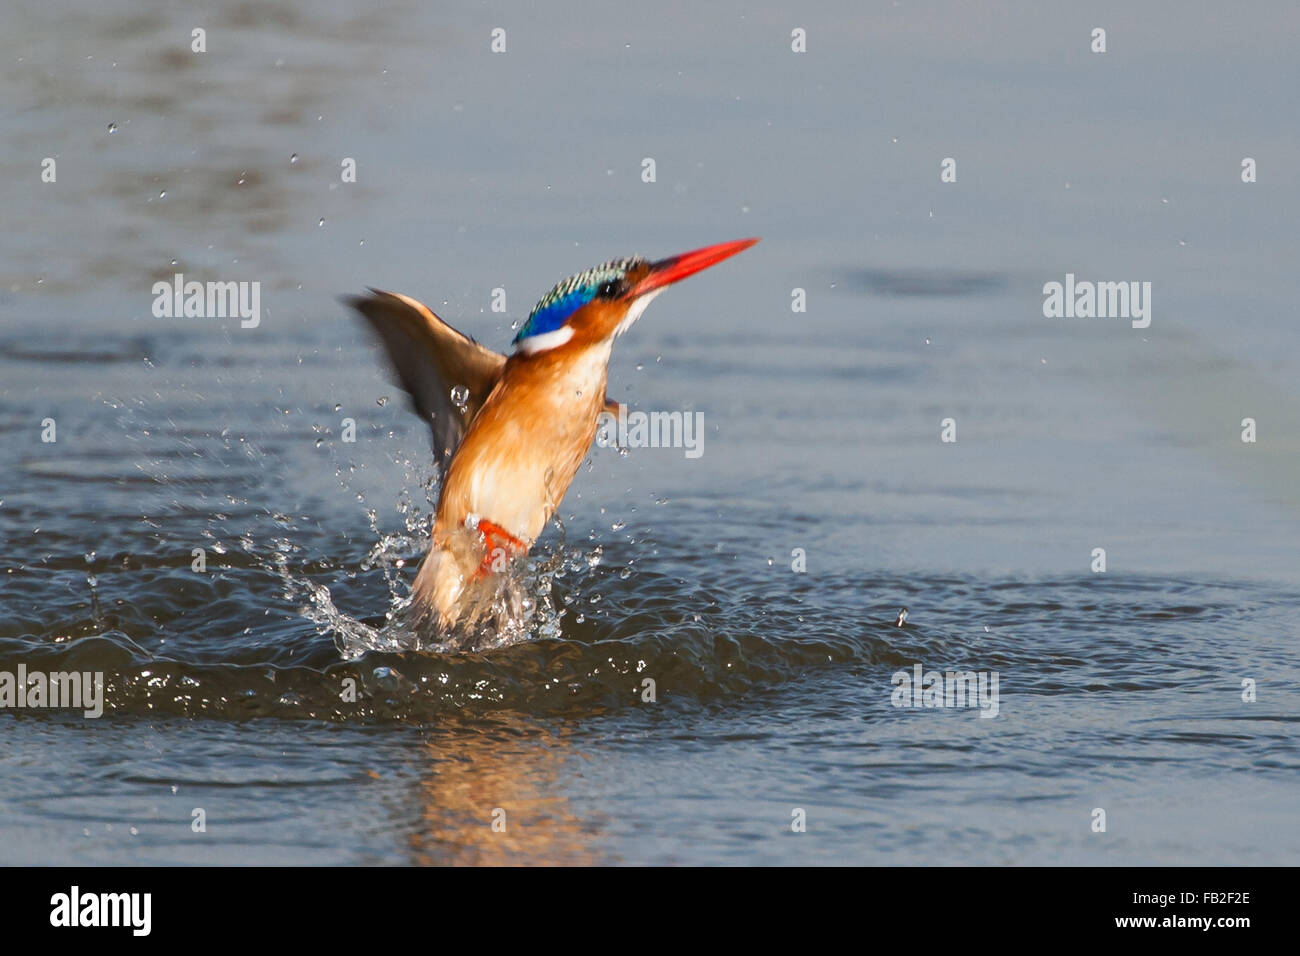 Malachite Kingfisher leaving water after diving for fish. Stock Photo